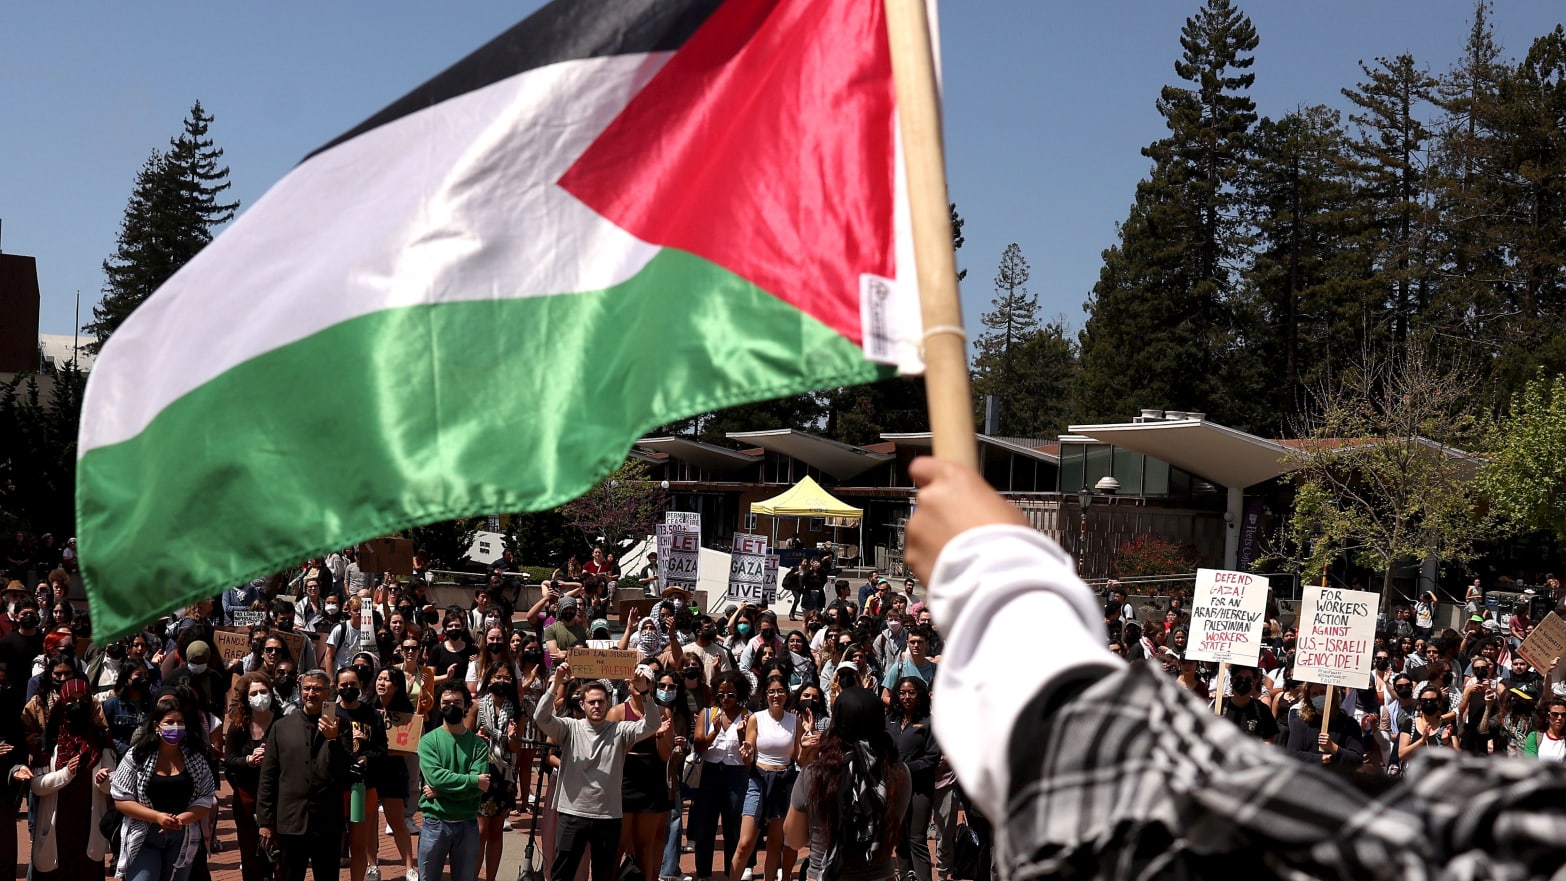 Photograph of a pro-Palestine protest at UC Berkeley